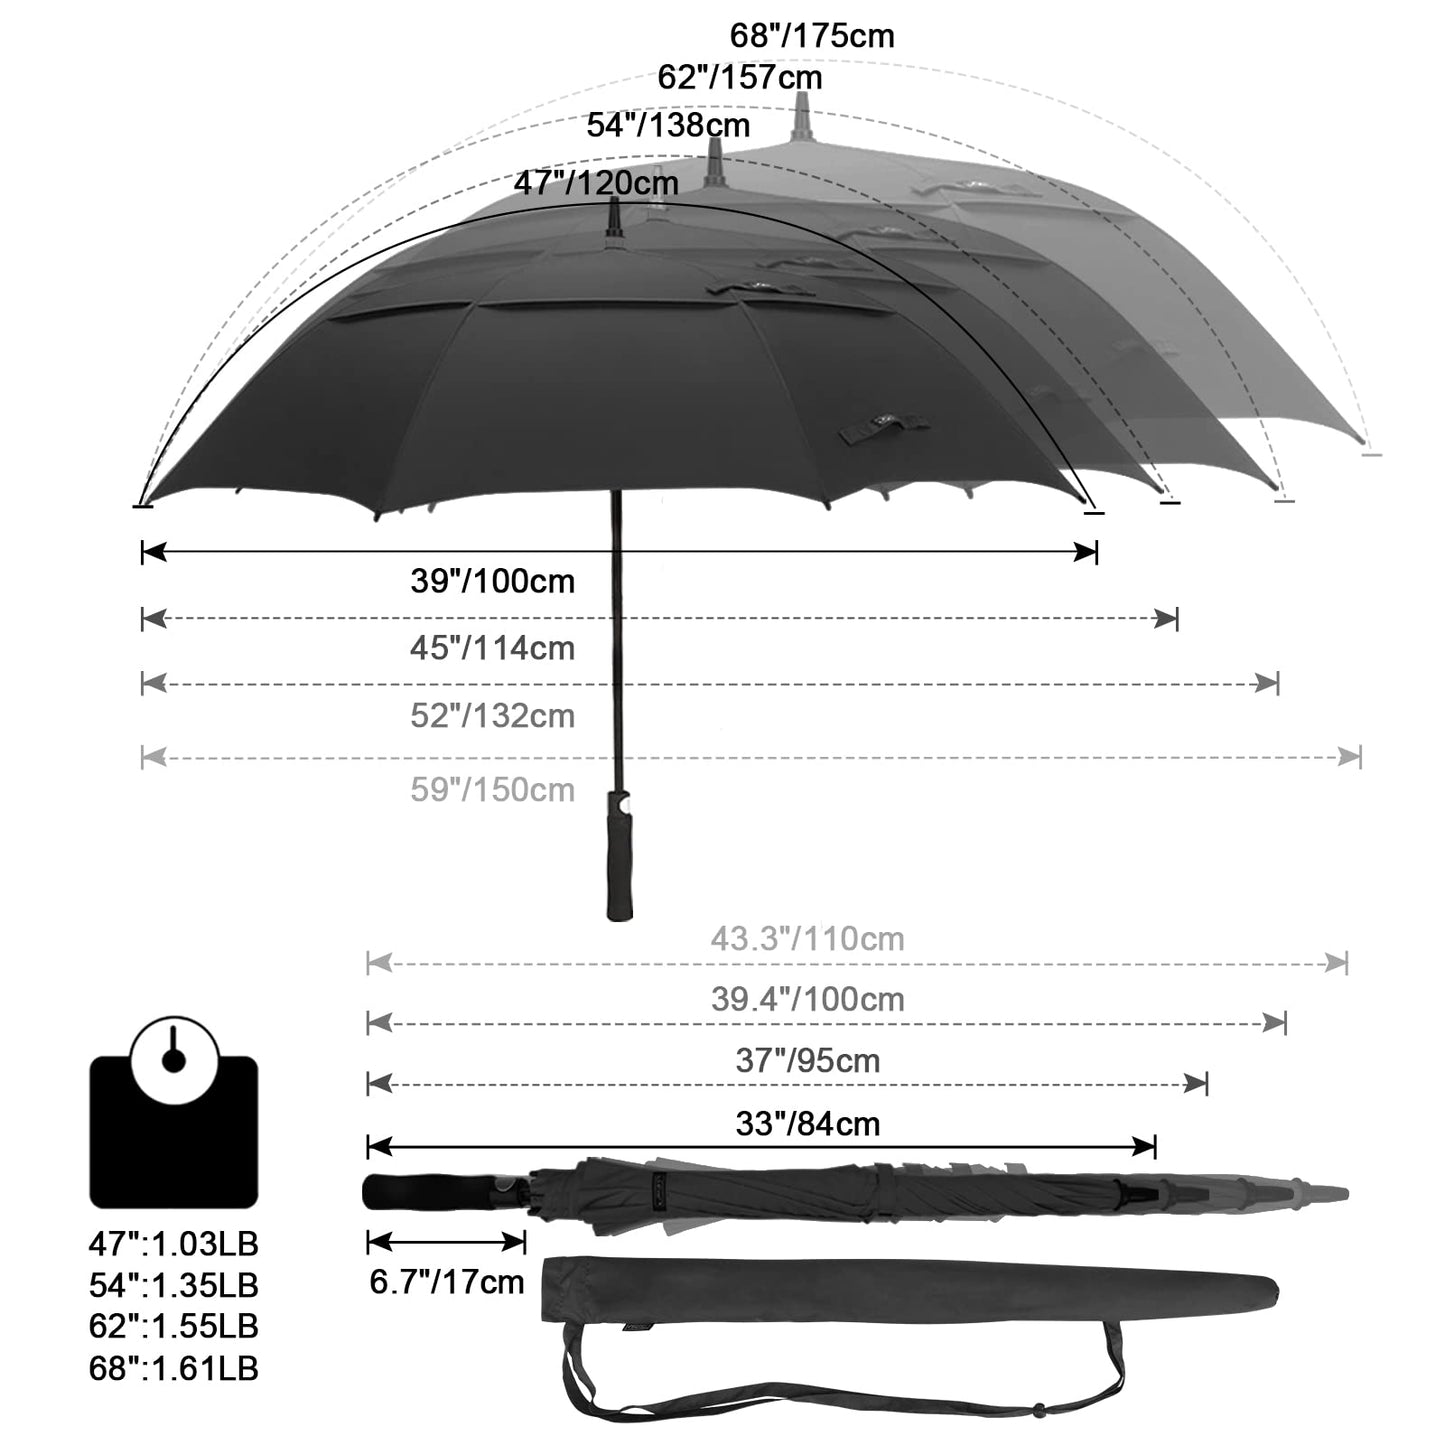 G4Free 47 Inch Automatic Open Golf Umbrella Extra Large Oversize Double Canopy Vented Windproof Waterproof Stick Umbrellas (Black)